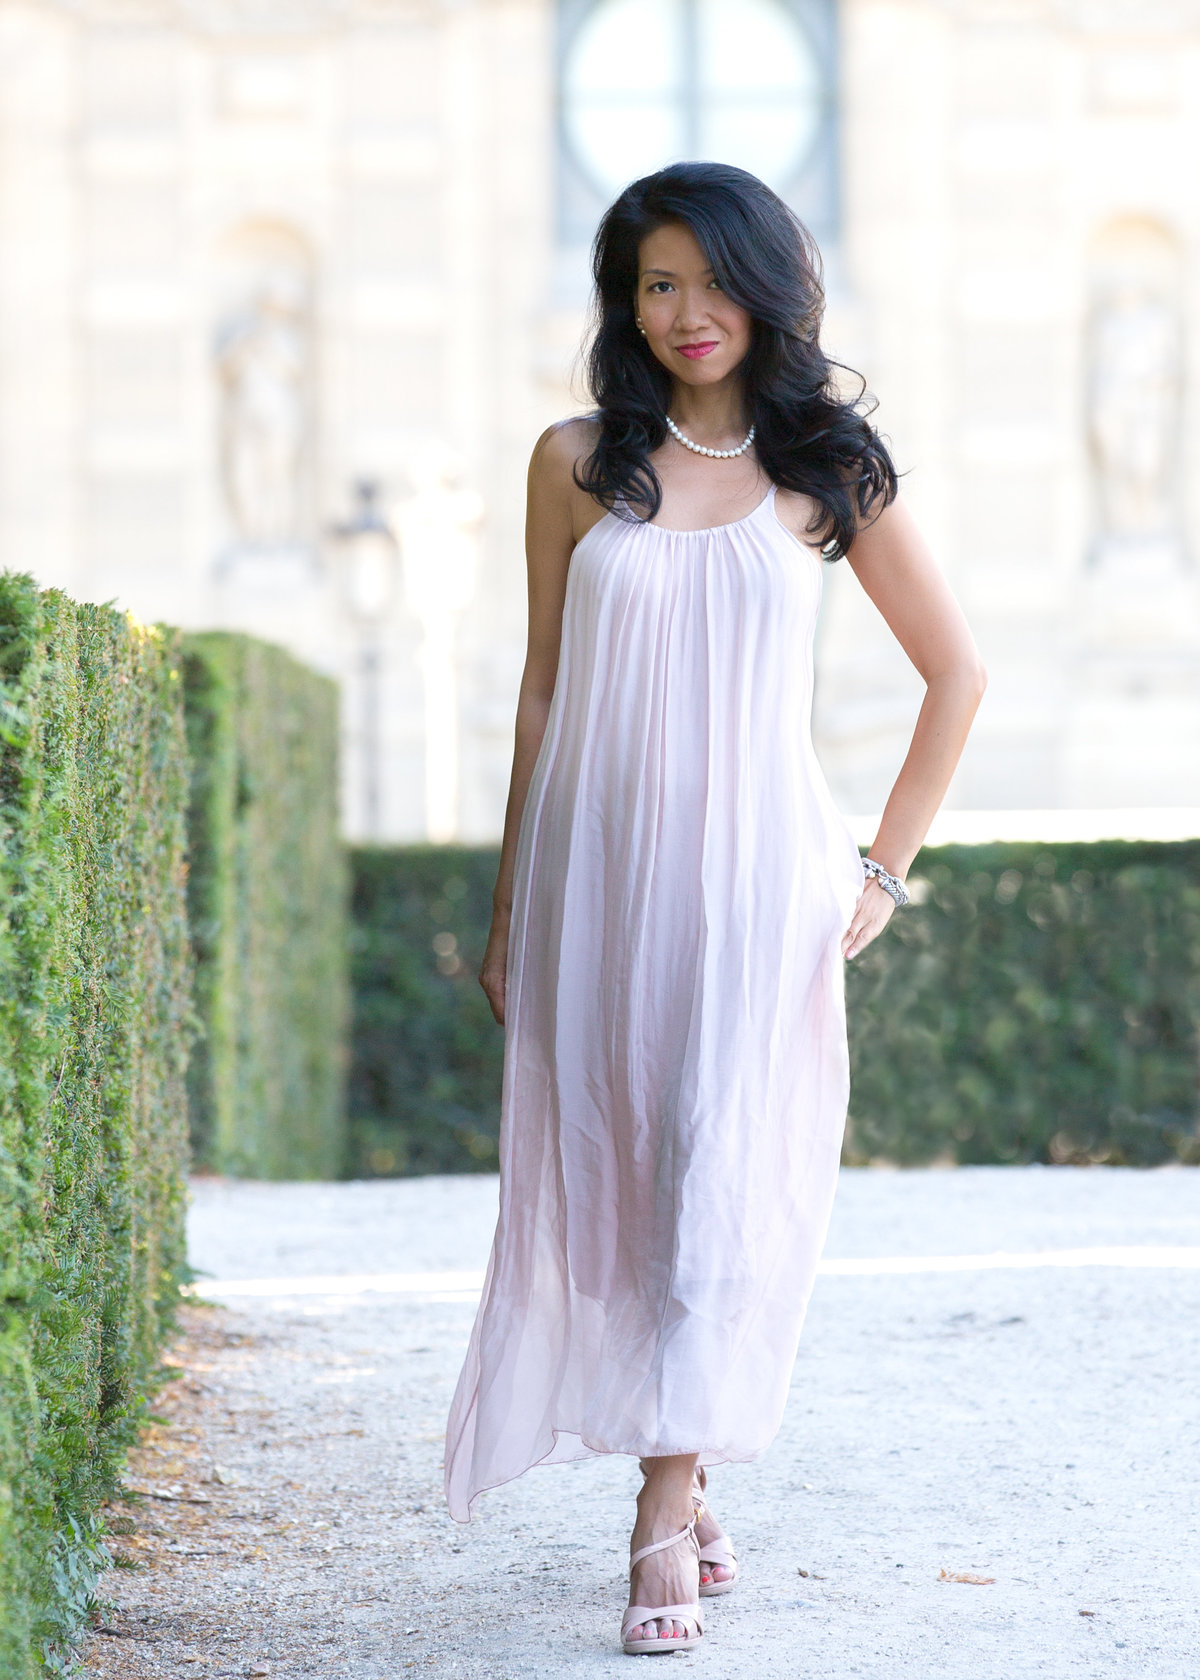 Paris photo session by Karissa Van Tassel featuring young woman at the Louvre